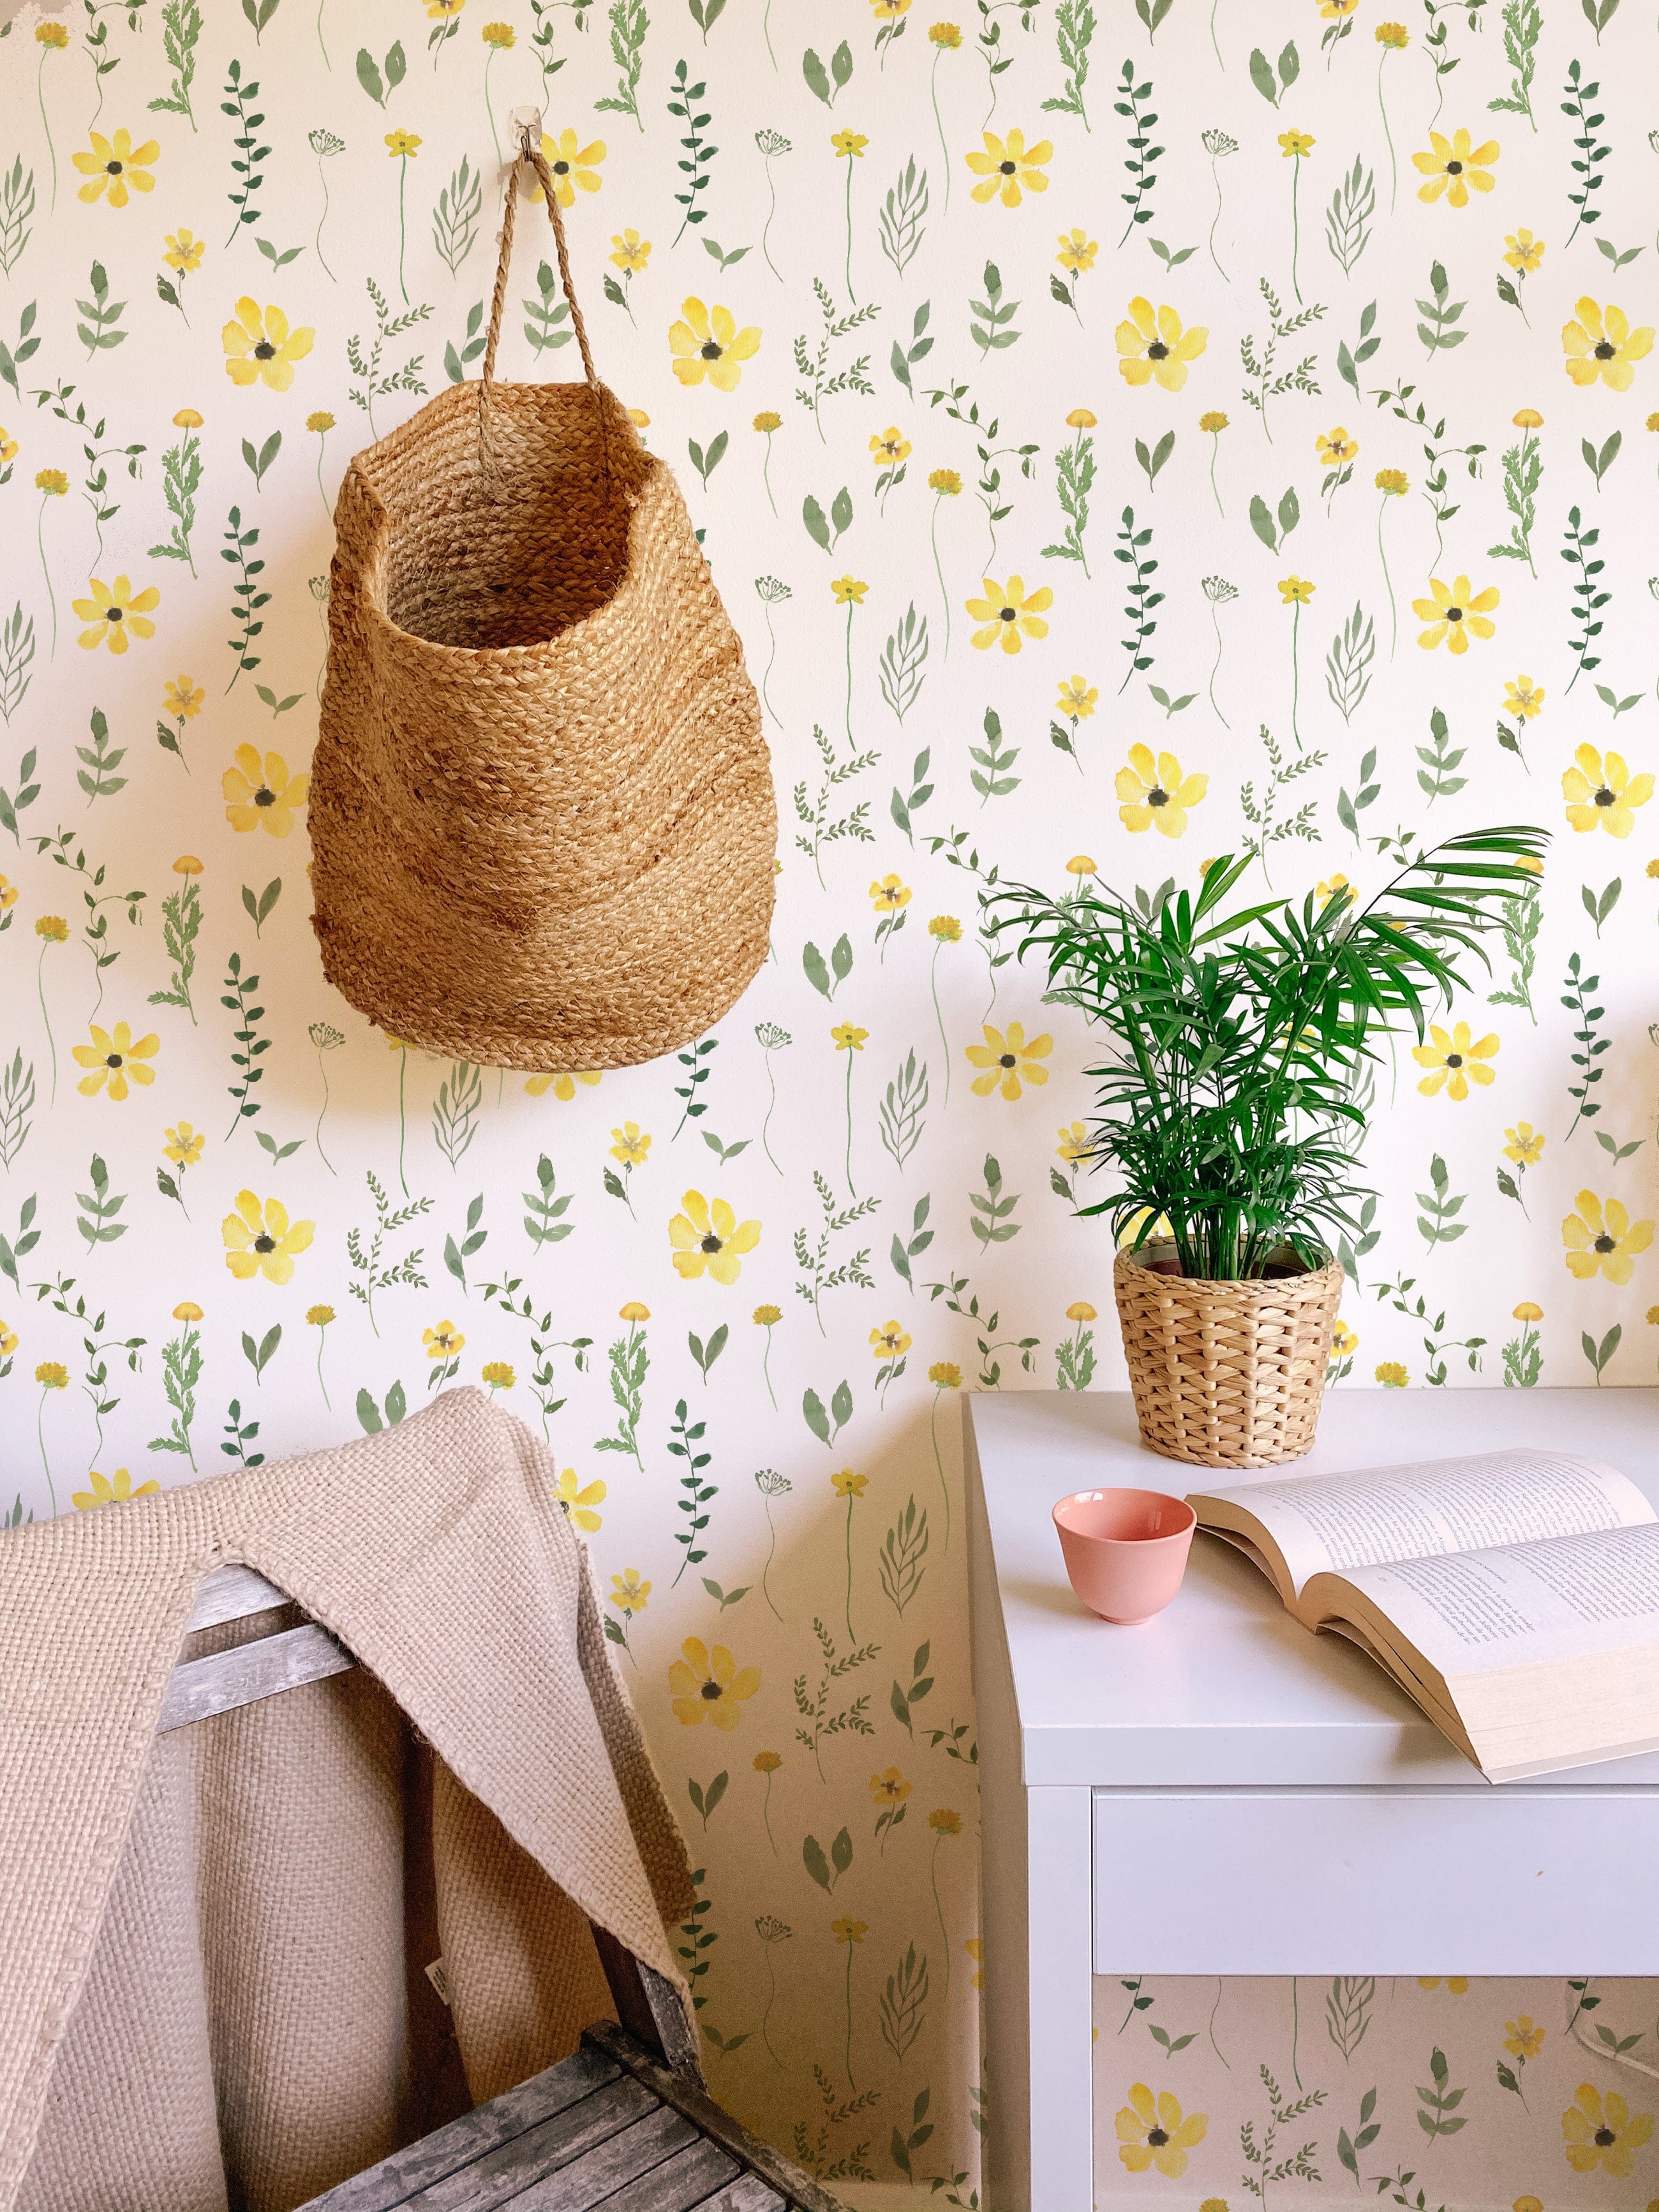 A cozy room featuring the Spring Field Wallpaper - V with a soft white background adorned with bright yellow flowers and green leaves, complemented by a woven basket hanging on the wall and a small potted plant on a white desk